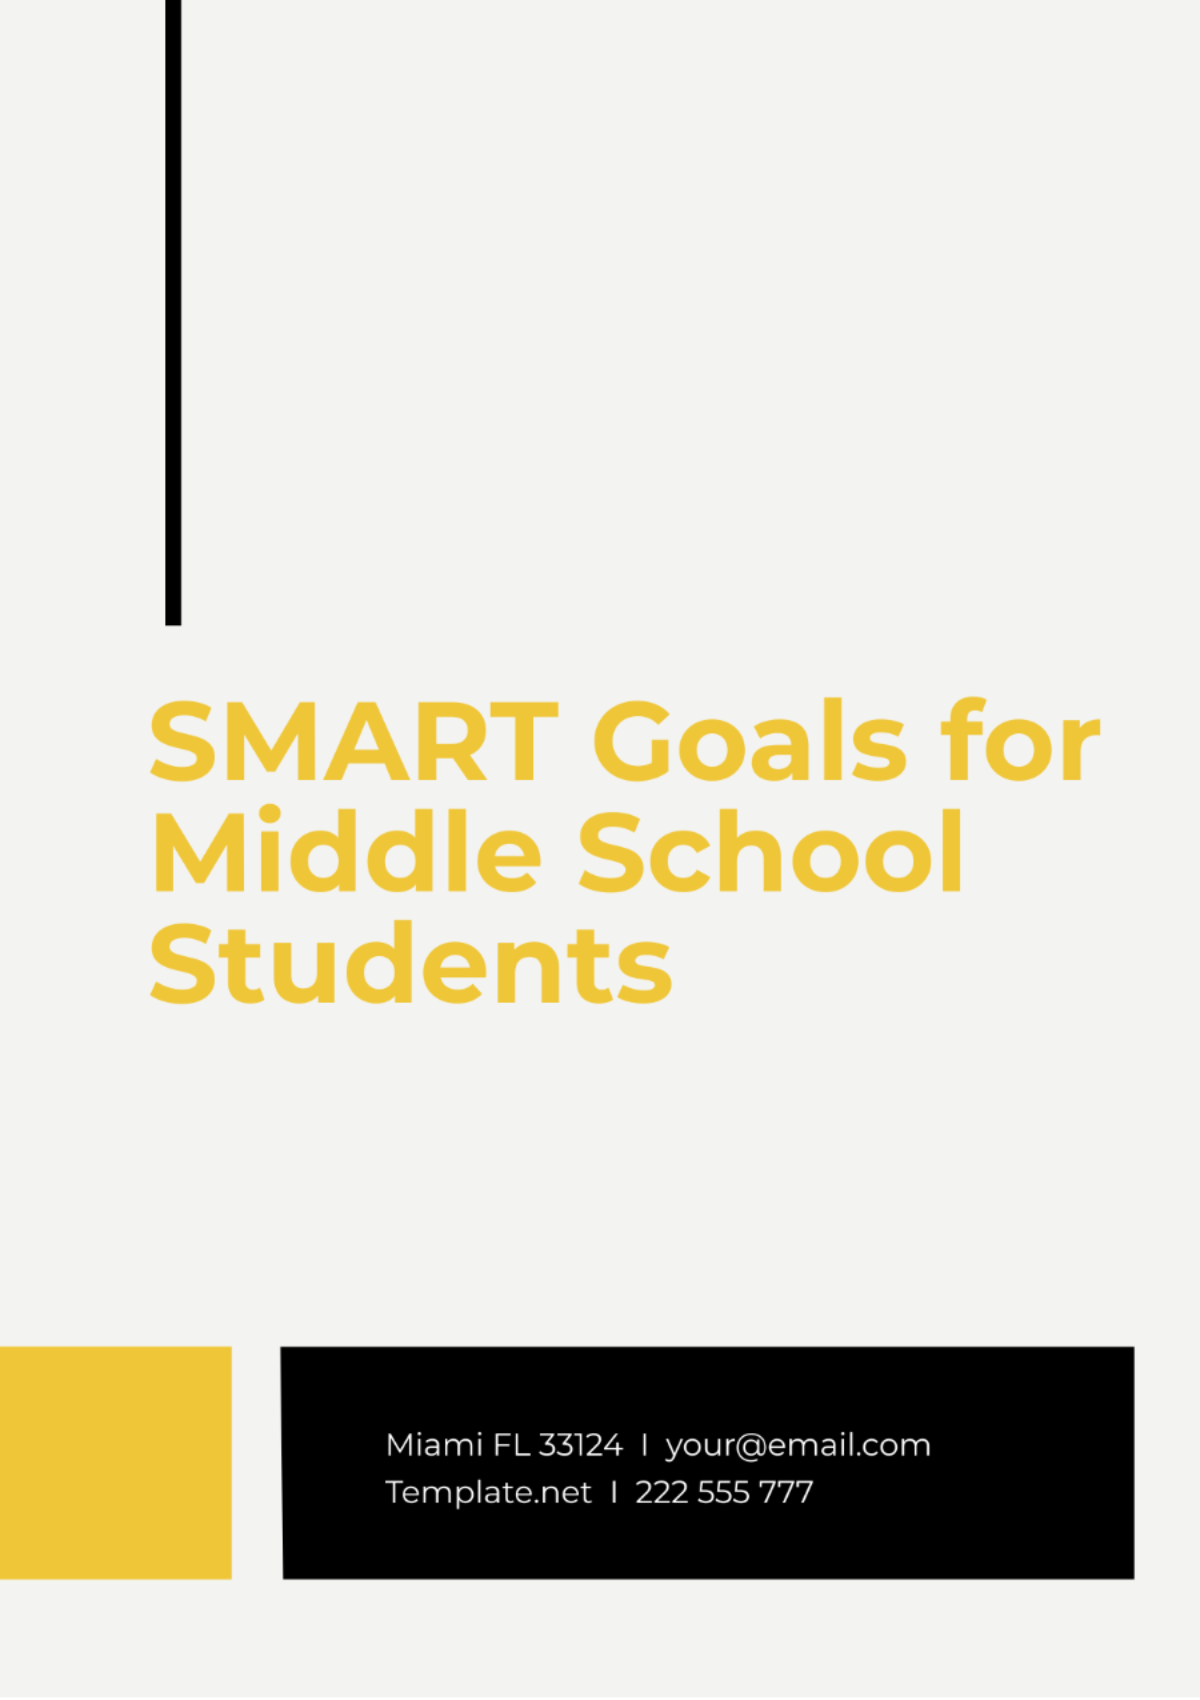 SMART Goals for Middle School Students Template